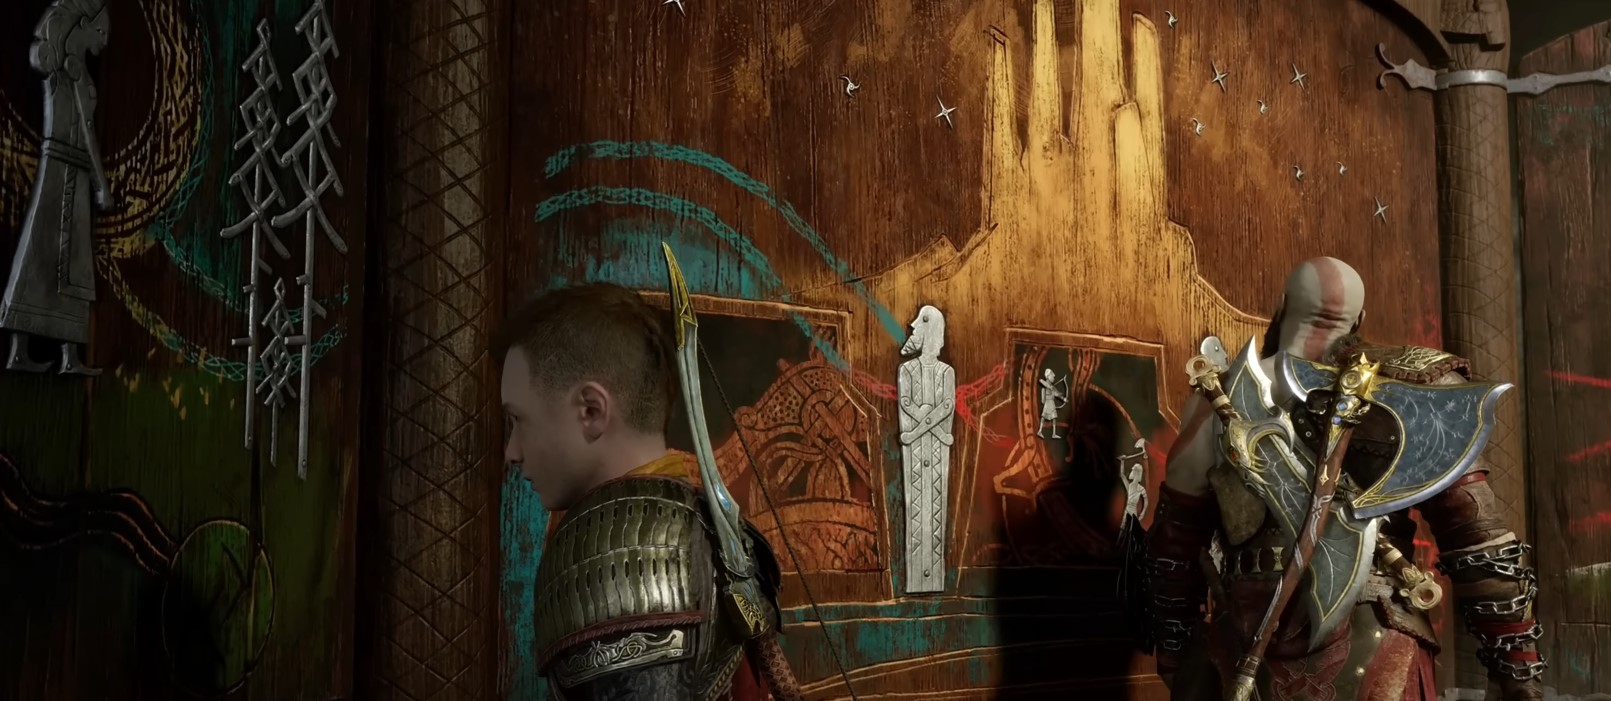 At the sanctuary, Kratos and Atreus check how their history was written.